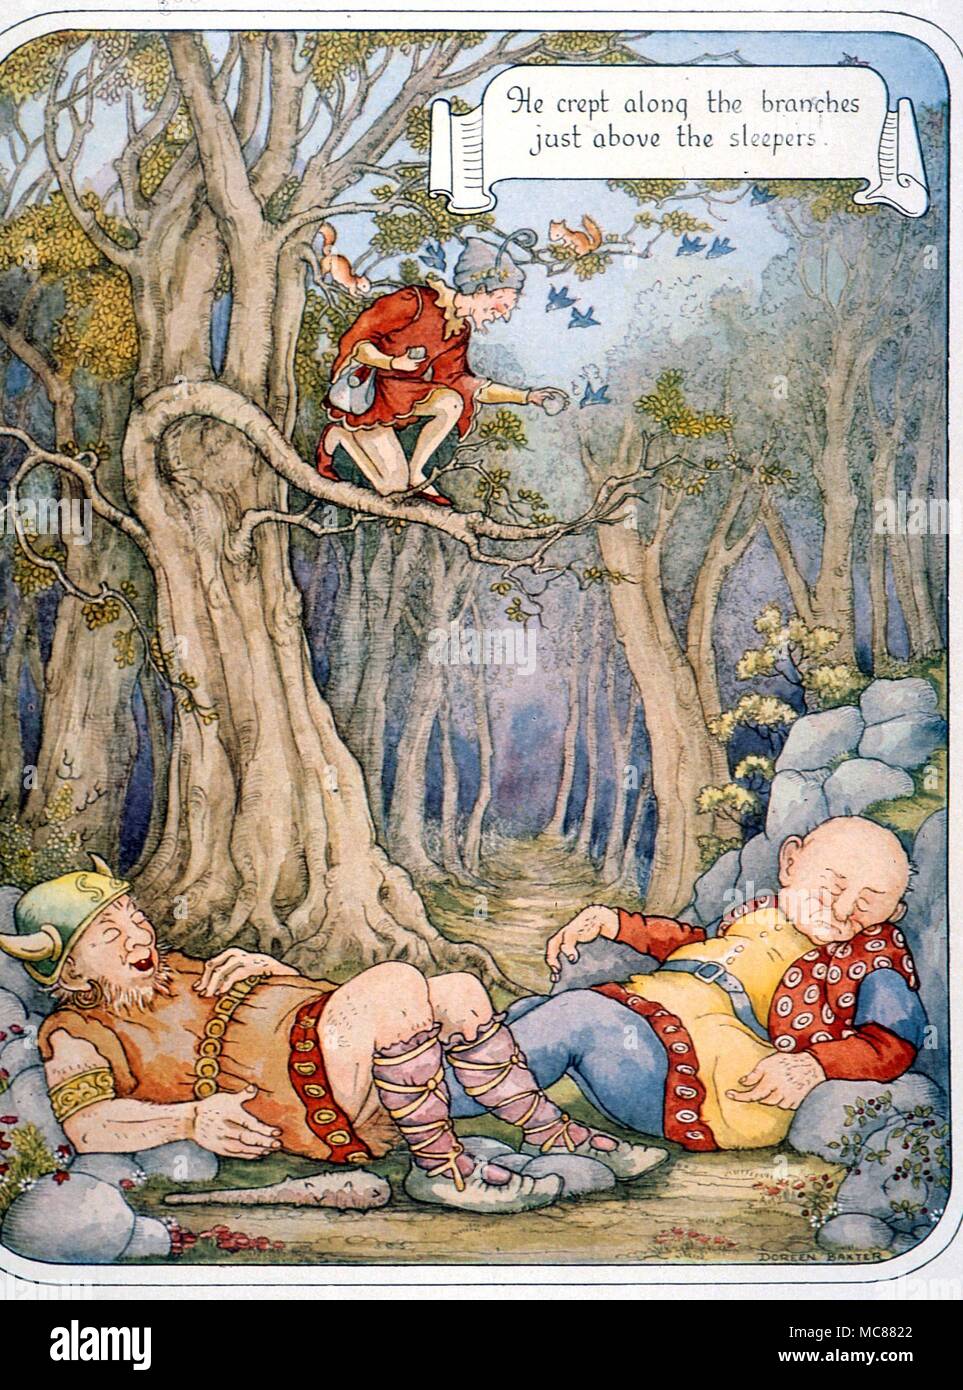 The Valiant Tailor - The Valiant Little Tailor above the sleeping giants - illustration by Doreen Baxter - from the Fairy-Tale Omnibus c.1949 Stock Photo